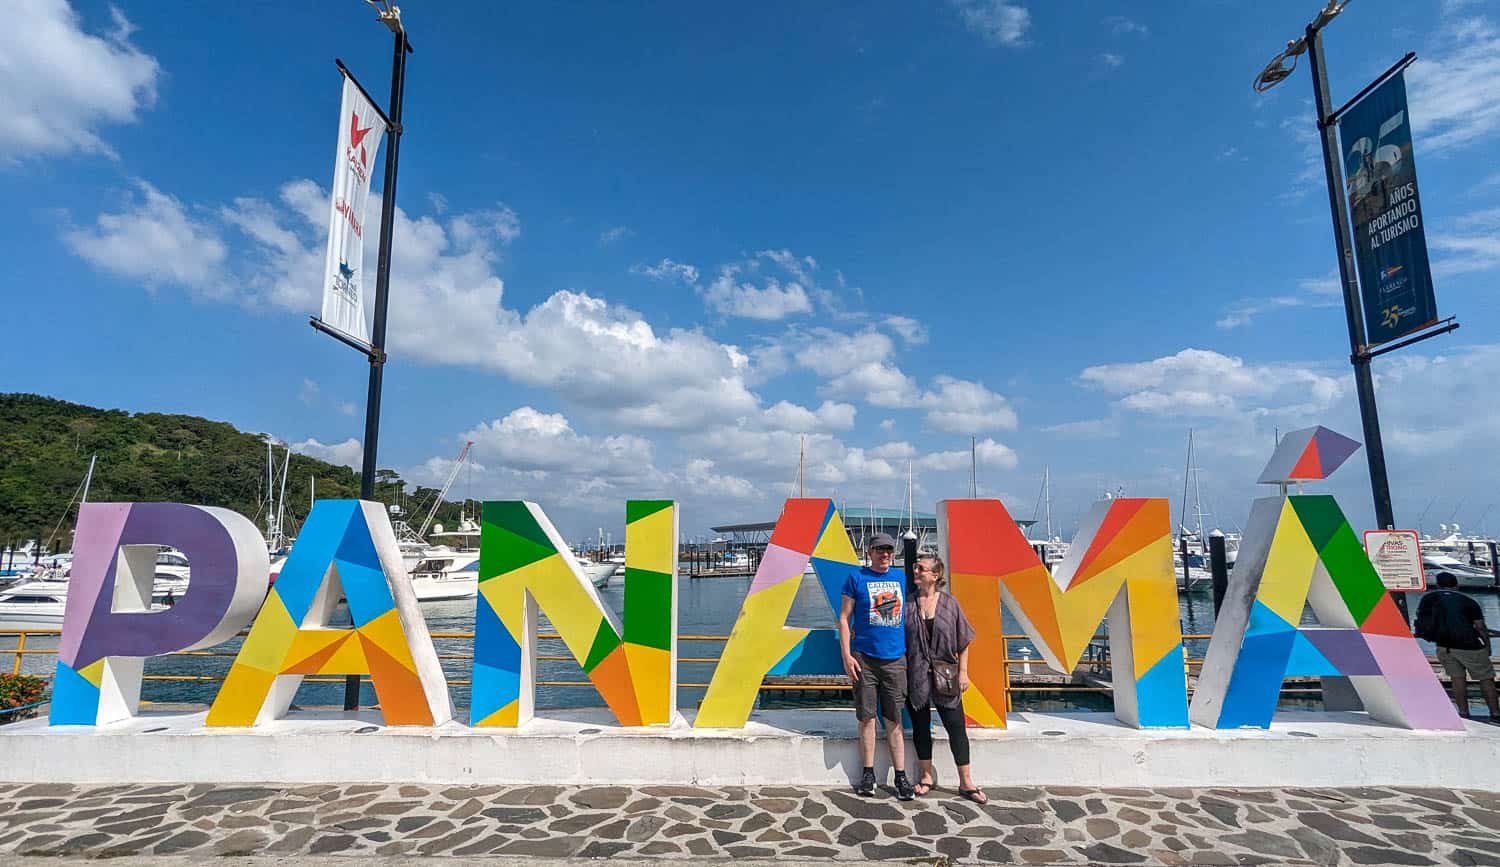 Pete and Dalene in Panama CIty